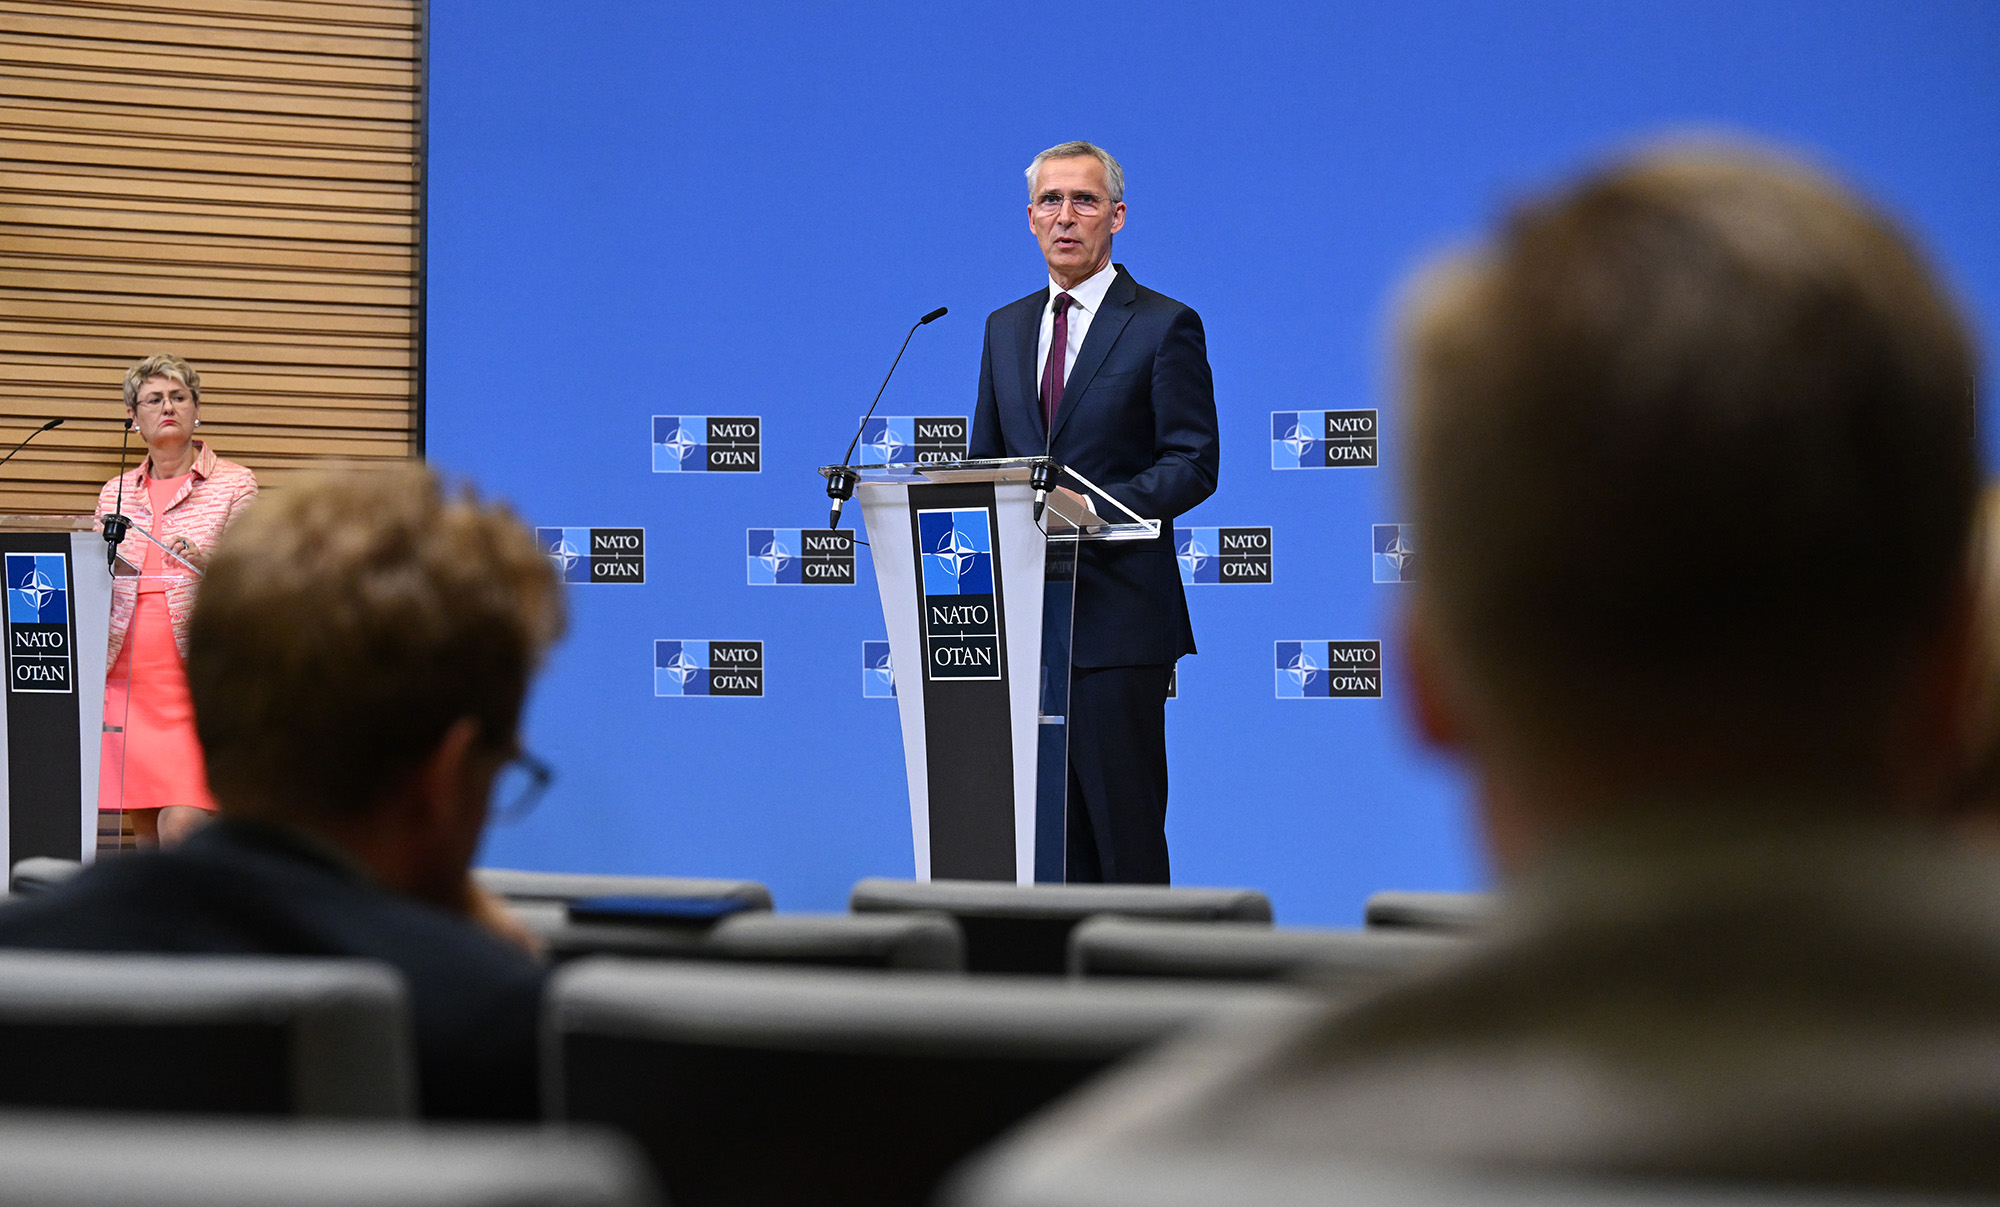 The NATO Secretary General Jens Stoltenberg attends a press conference held following a meeting attended by delegations from Turkiye, Finland, and Sweden, in Brussels, Belgium on July 6.